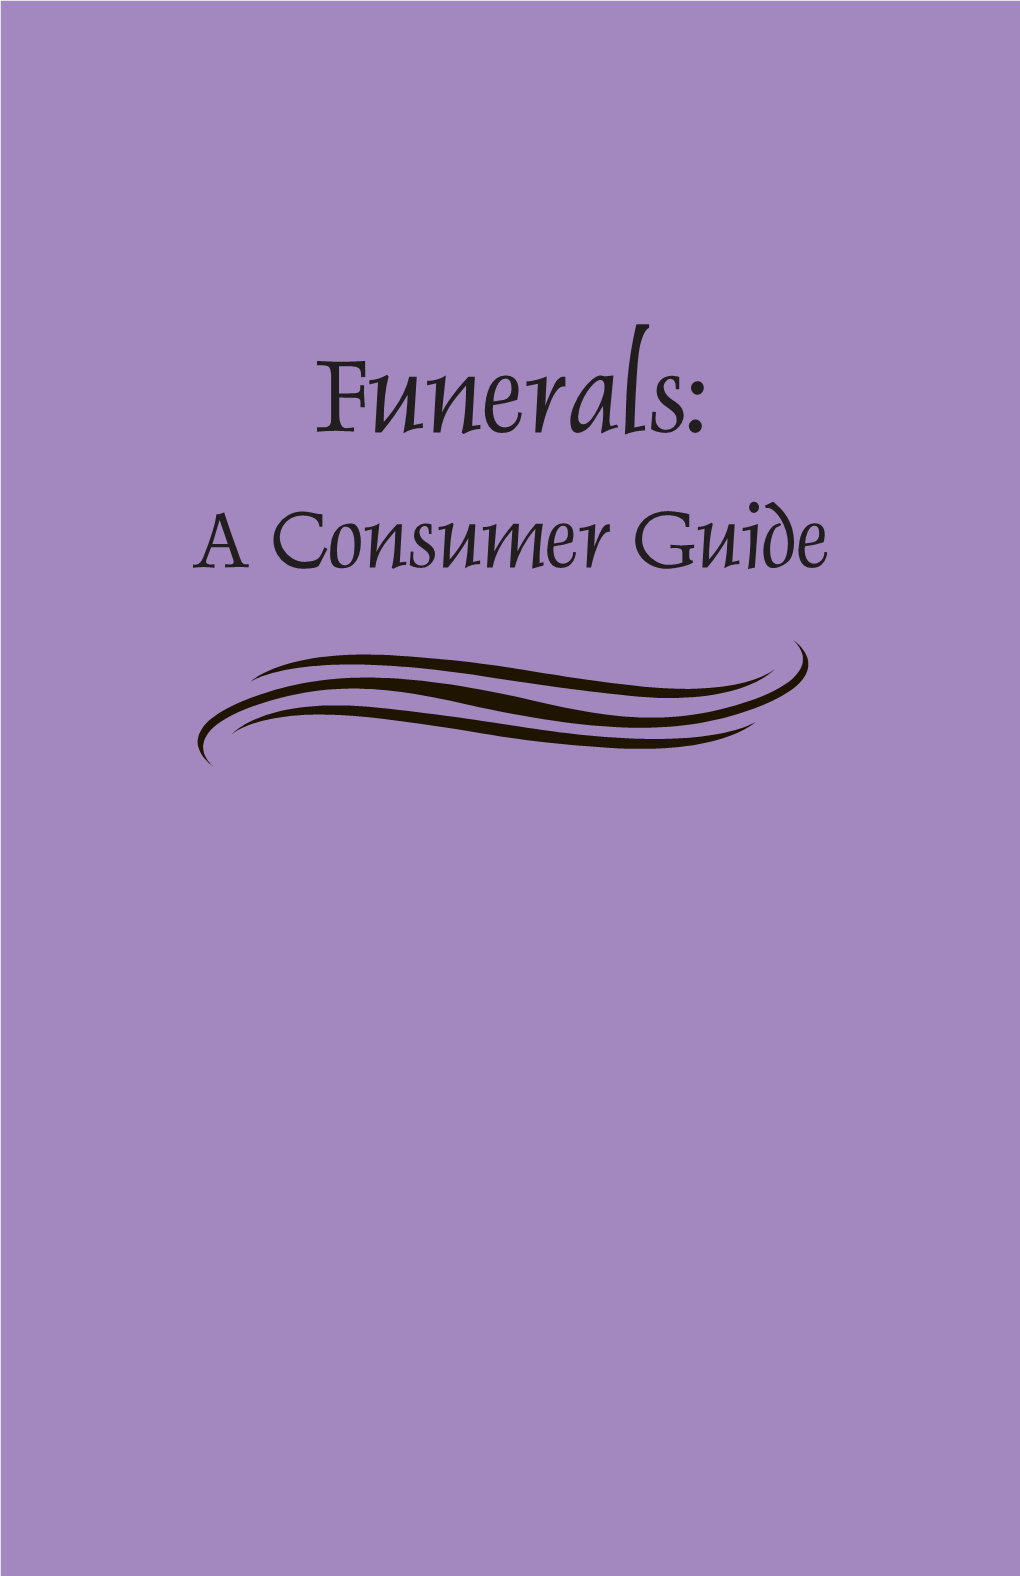 Funerals: a Consumer Guide